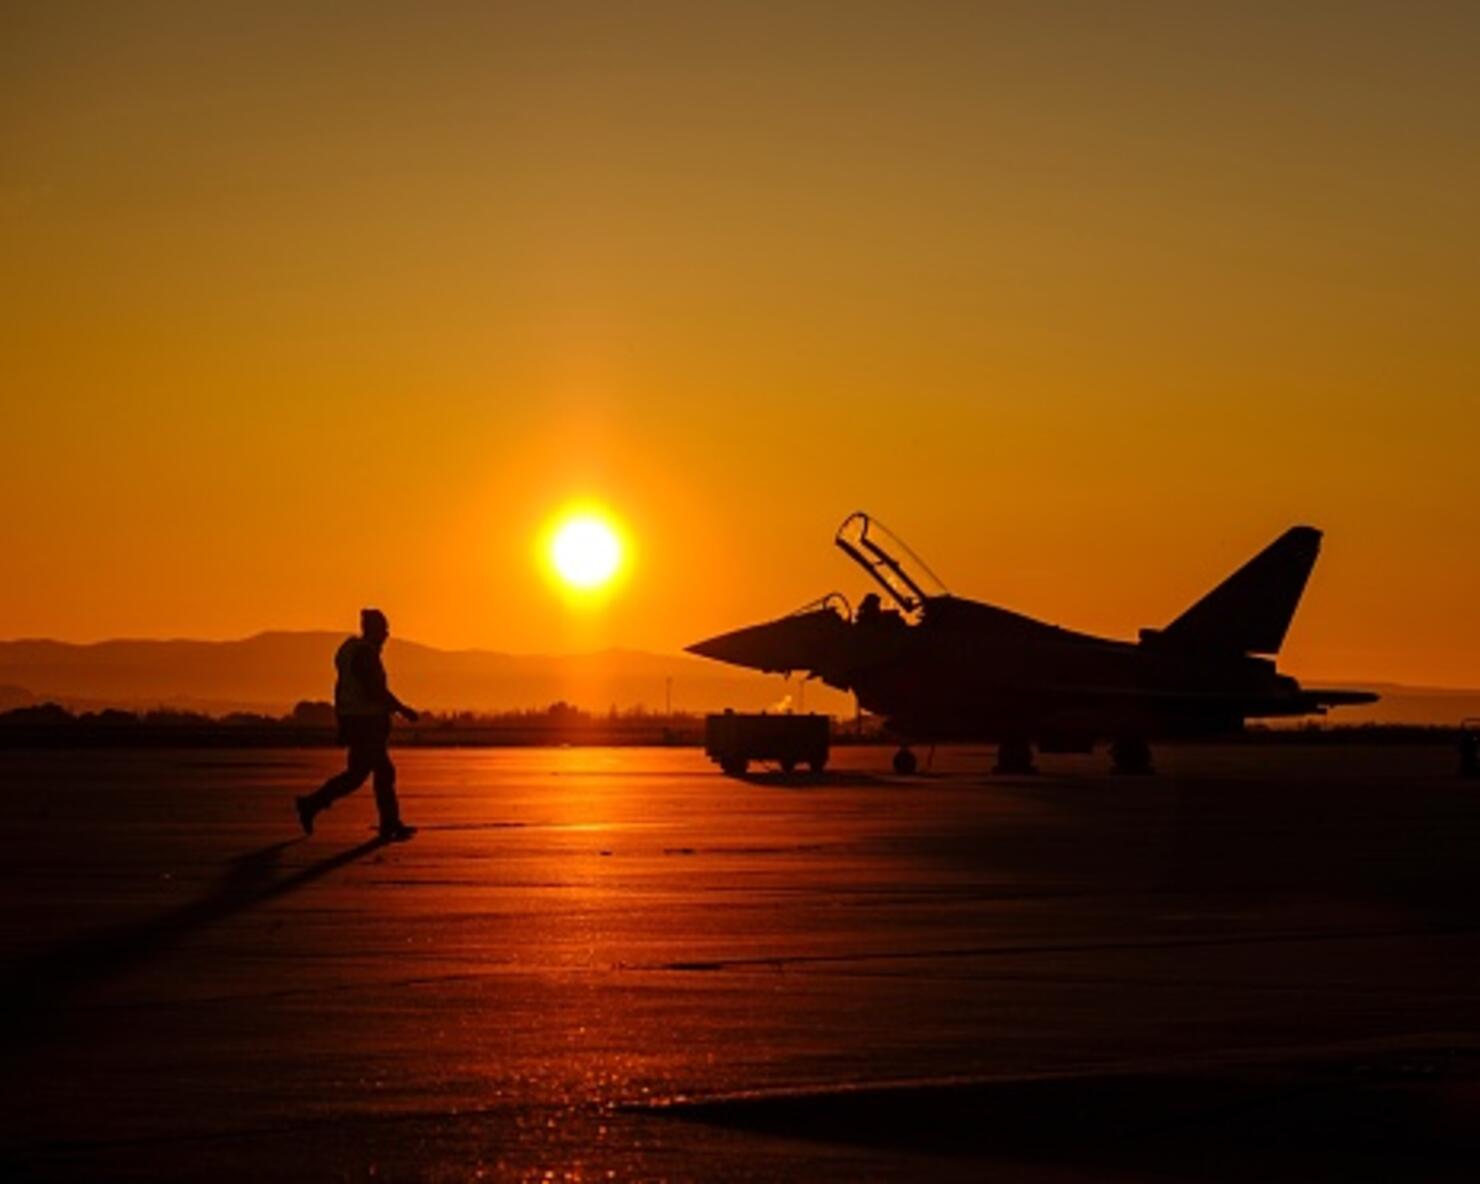 Silhouette Man Walking By Fighter Plane On Runway During Sunset